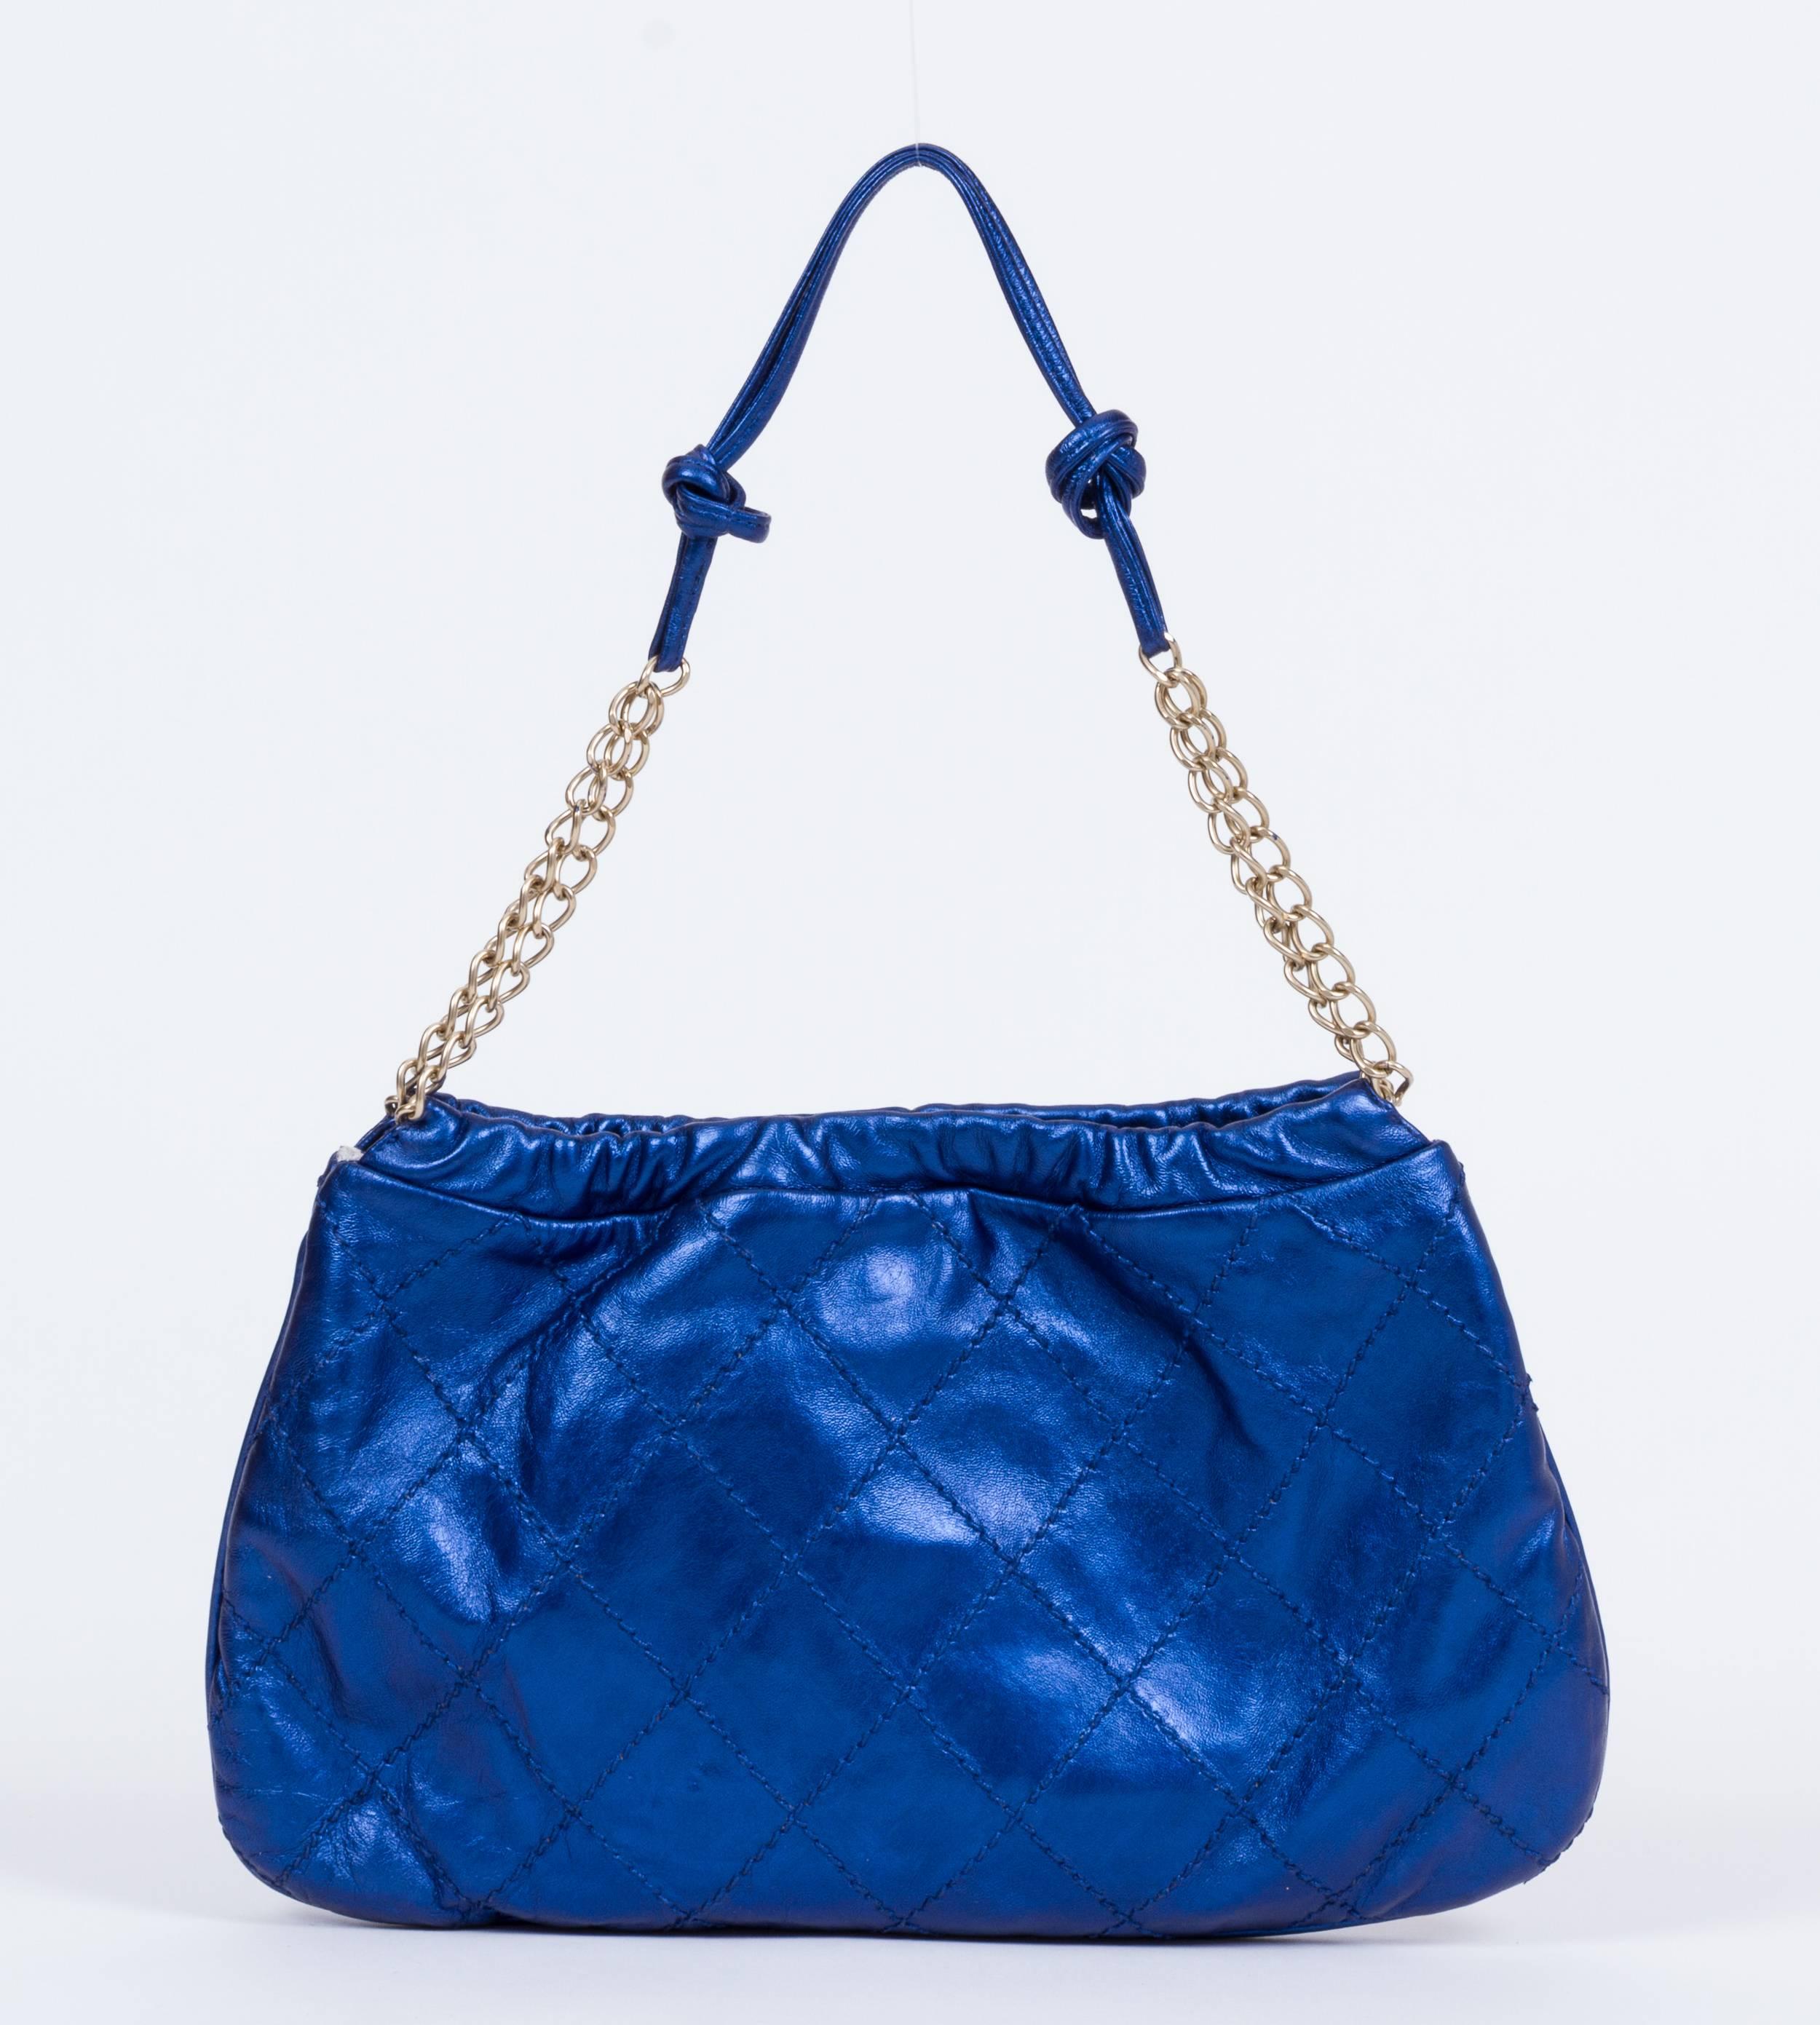 Chanel Metallic Blue Rose Shoulder Bag In Good Condition In West Hollywood, CA